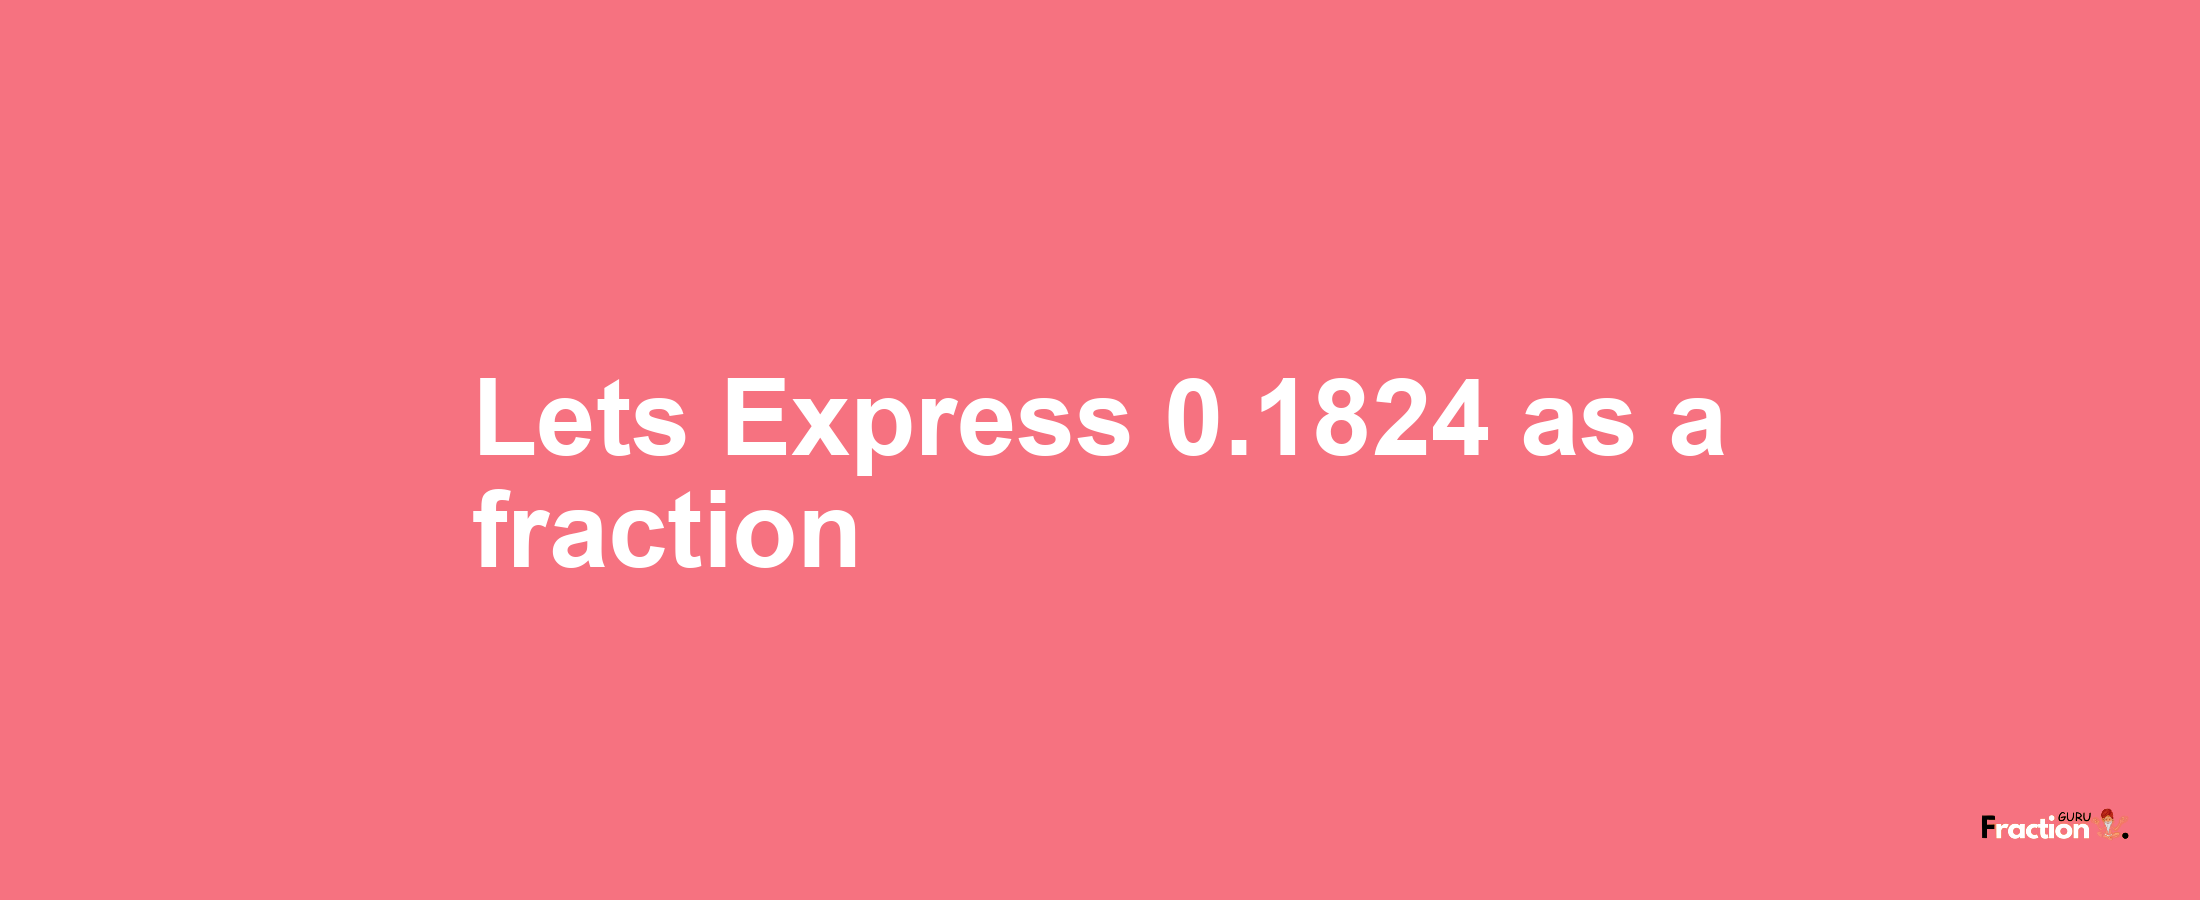 Lets Express 0.1824 as afraction